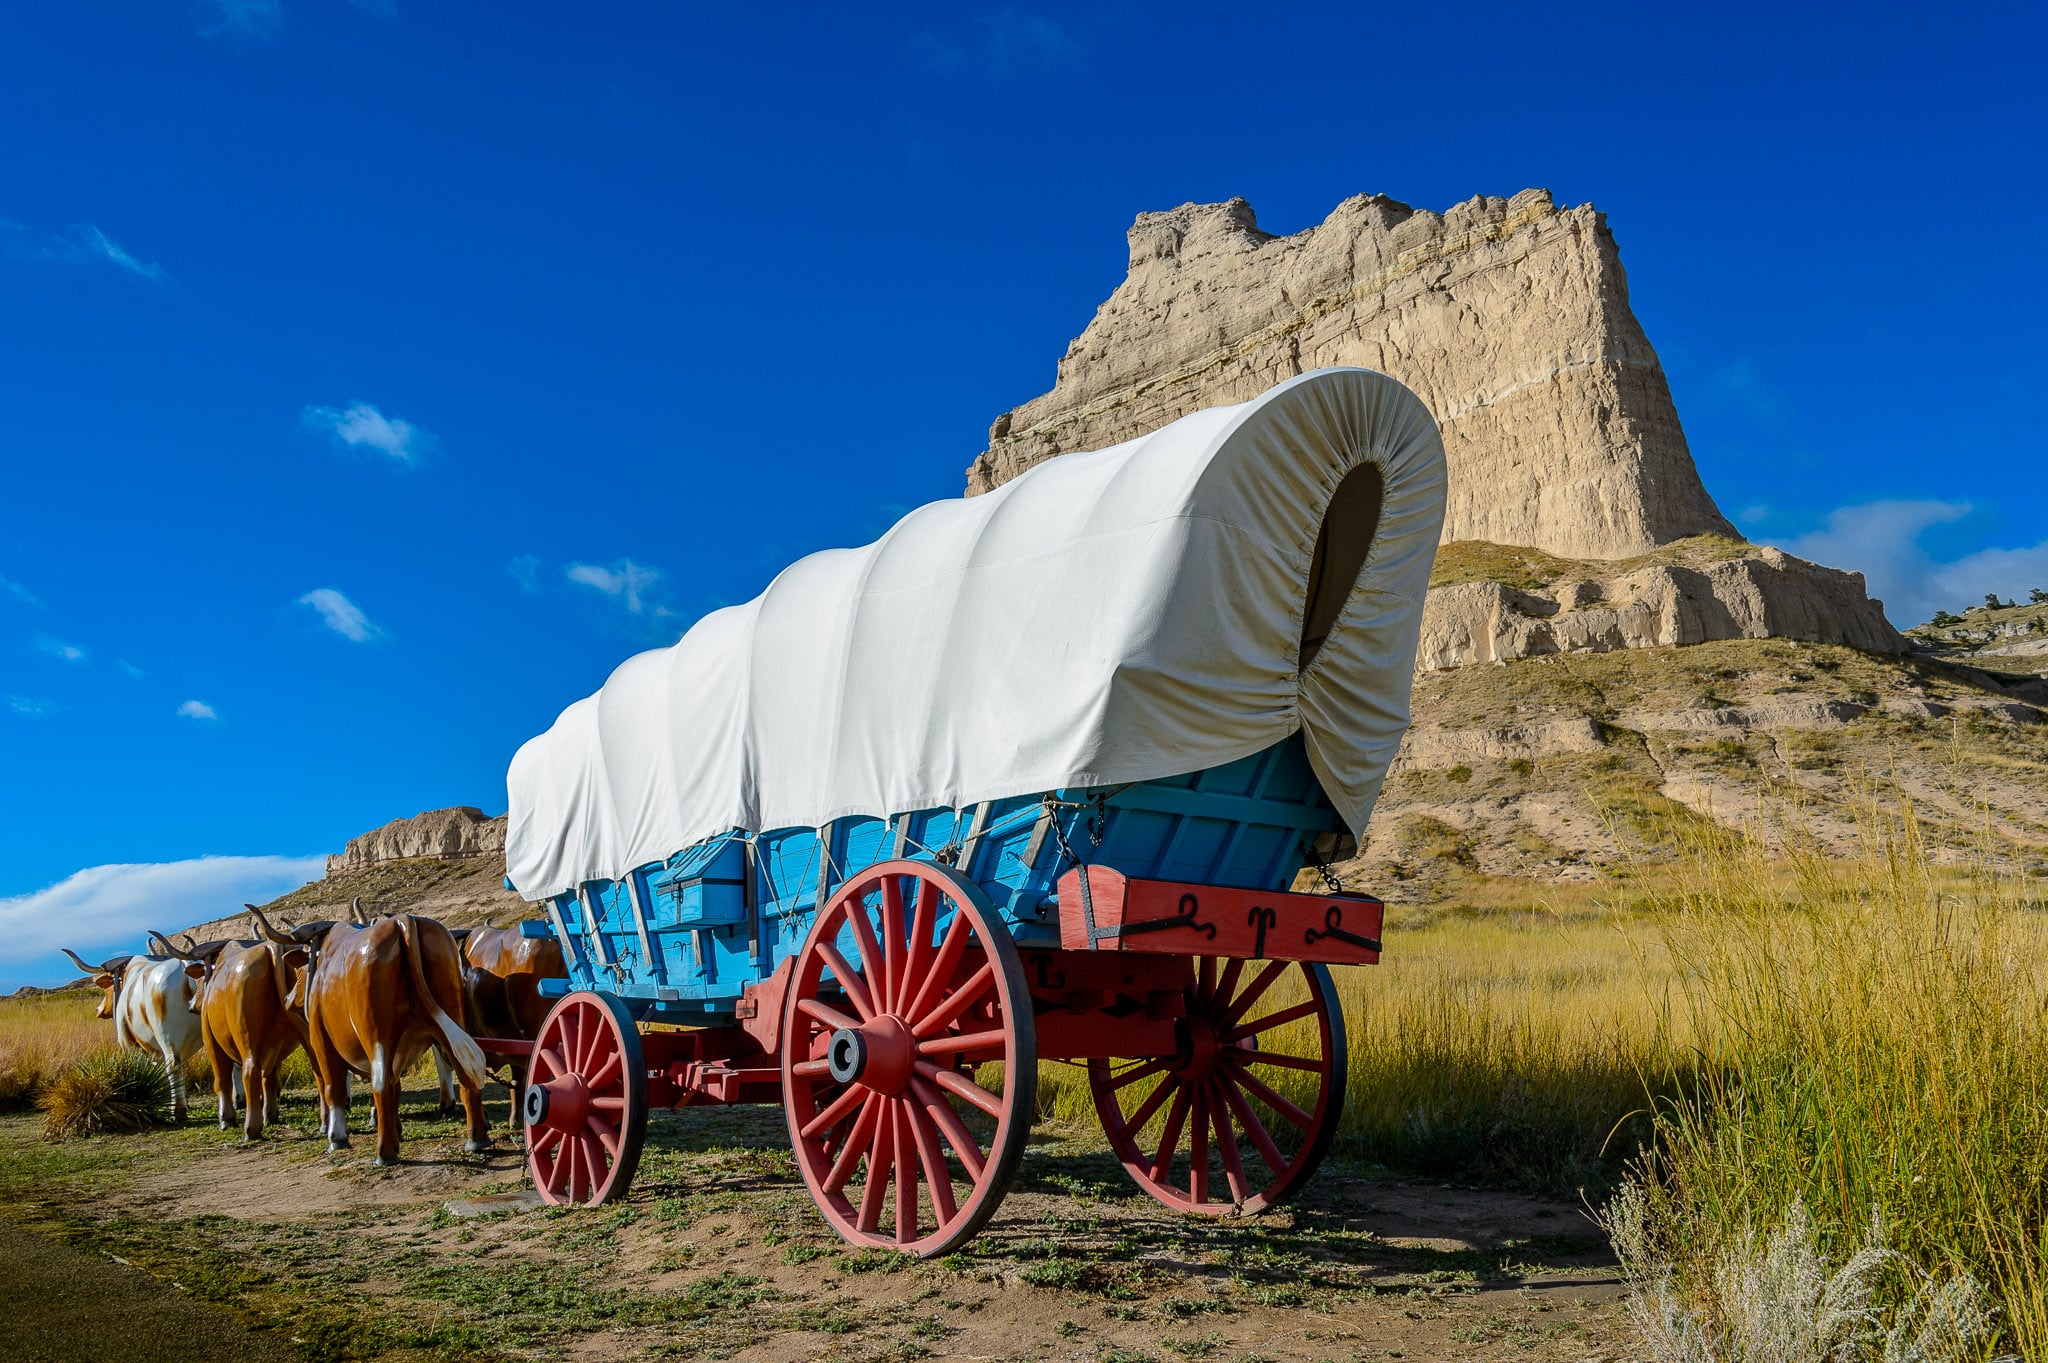 This re-creation of a Conestoga wagon with a team of oxen is prominantly displayed along the entrance road to Scotts Bluff National Monument.